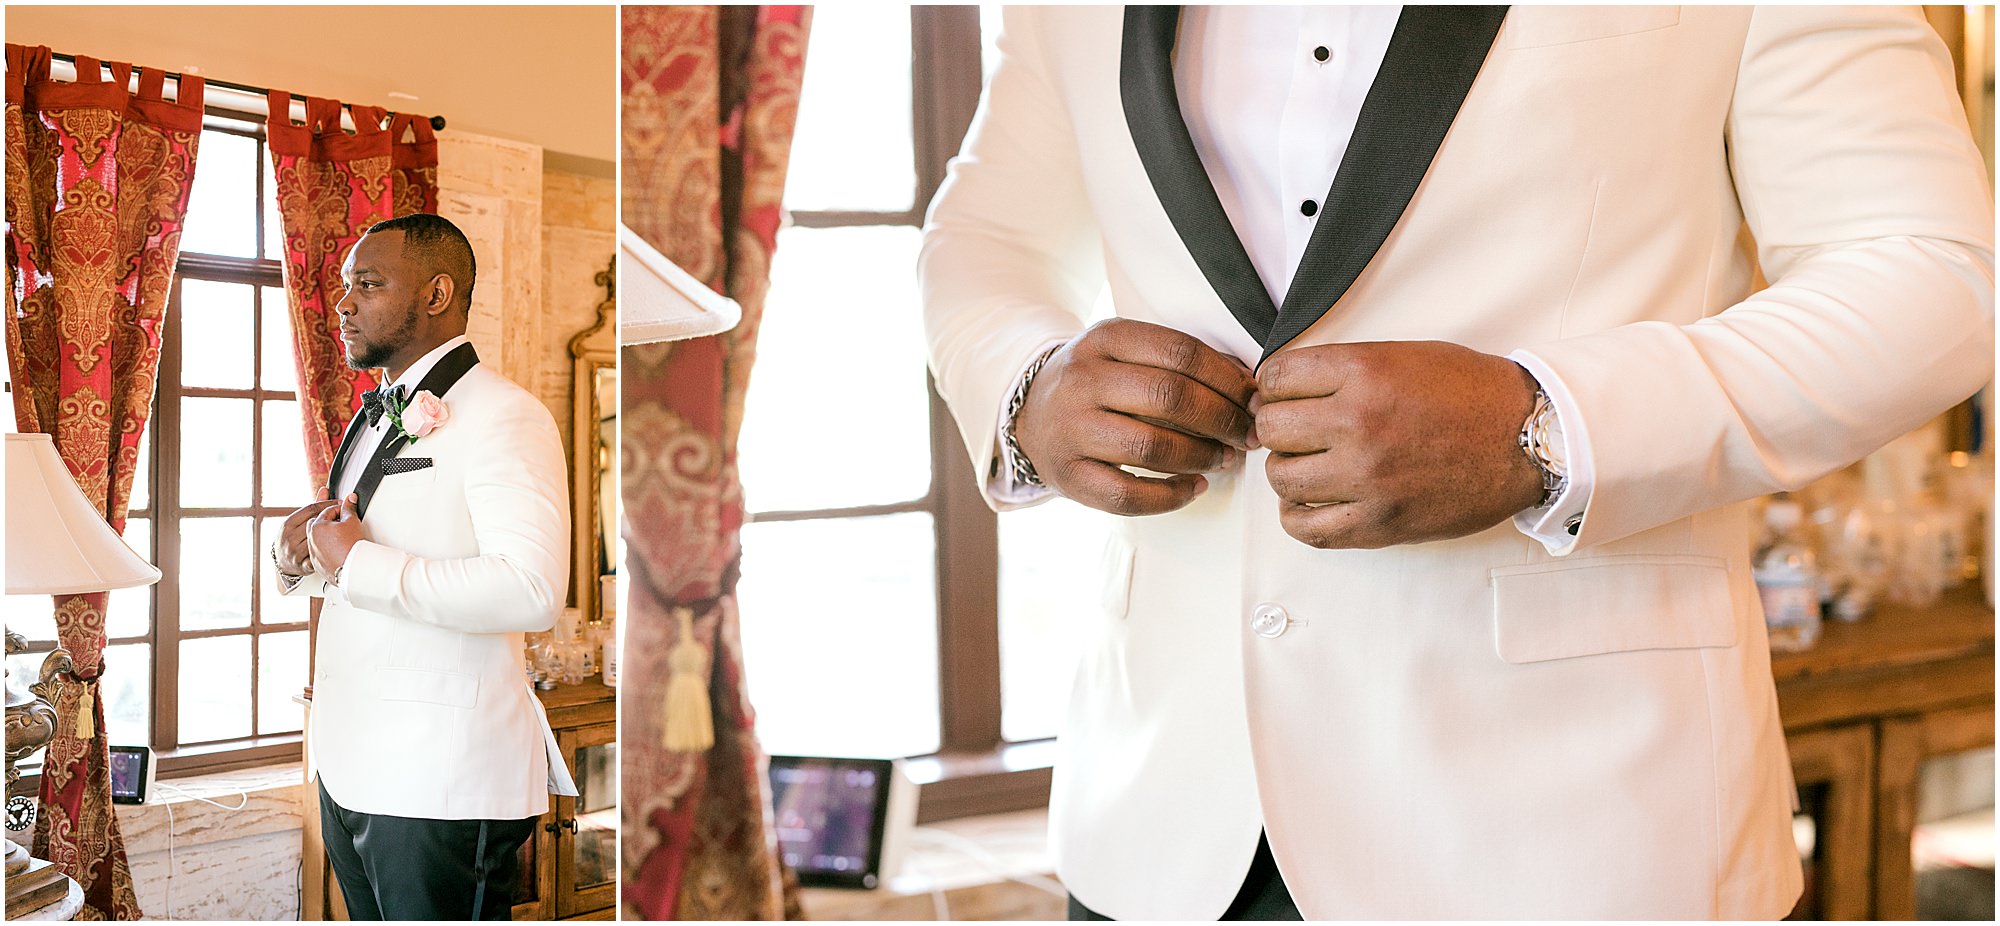 Groom getting into his white suit with black accents